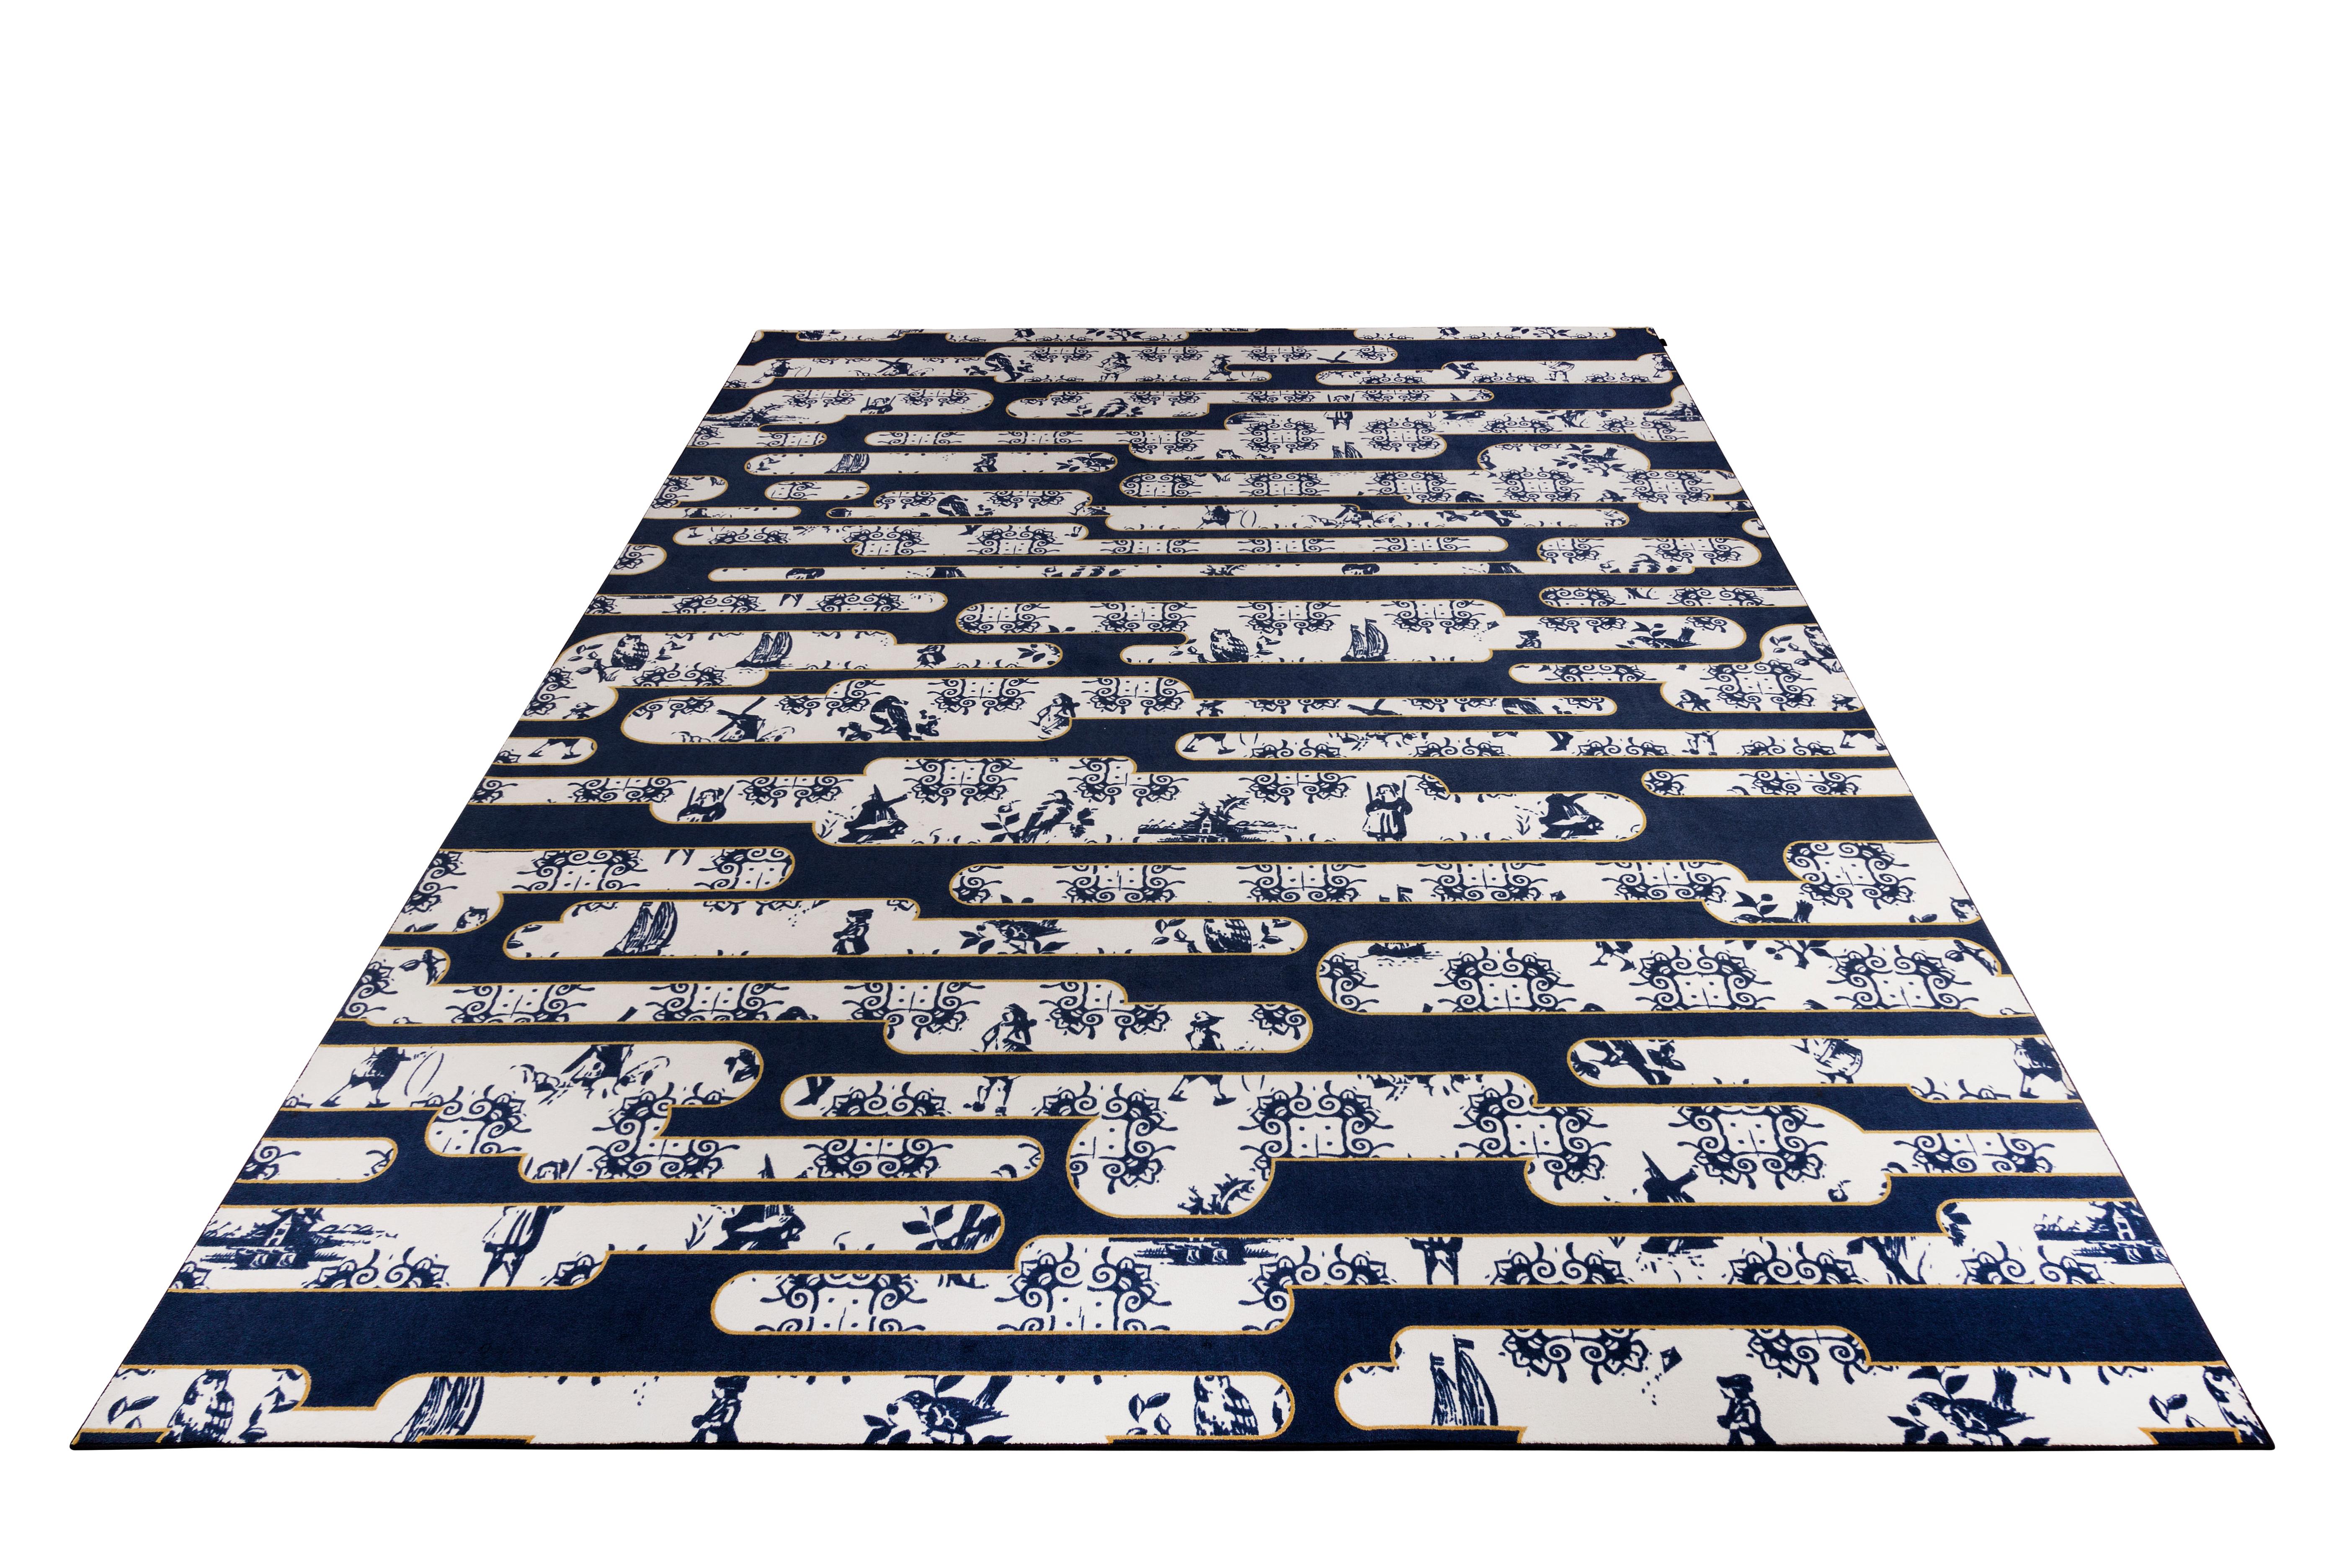 Moooi dutch sky blue rug in low pile polyamide by Edward van Vliet

After his graduation from the Design Academy Eindhoven in 1989 – Edward belongs to the famous generation of Dutch designers who have been causing international sensation for many